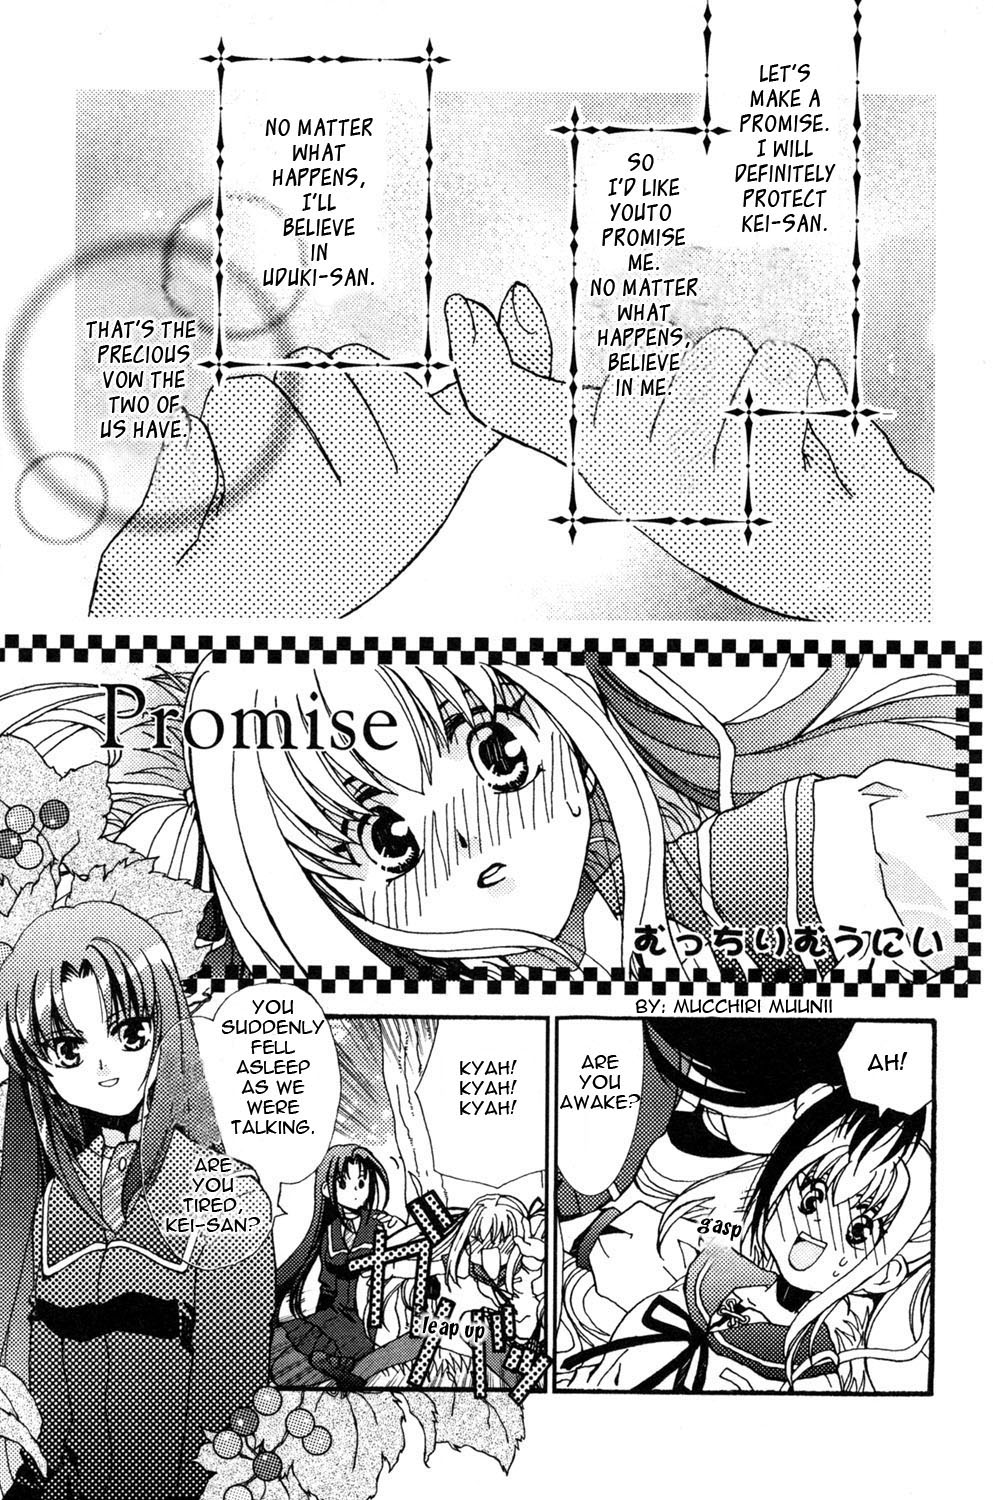 Akaiito Anthology Comic Vol. 1 Ch. 9 Promise (by Muttri Moony)